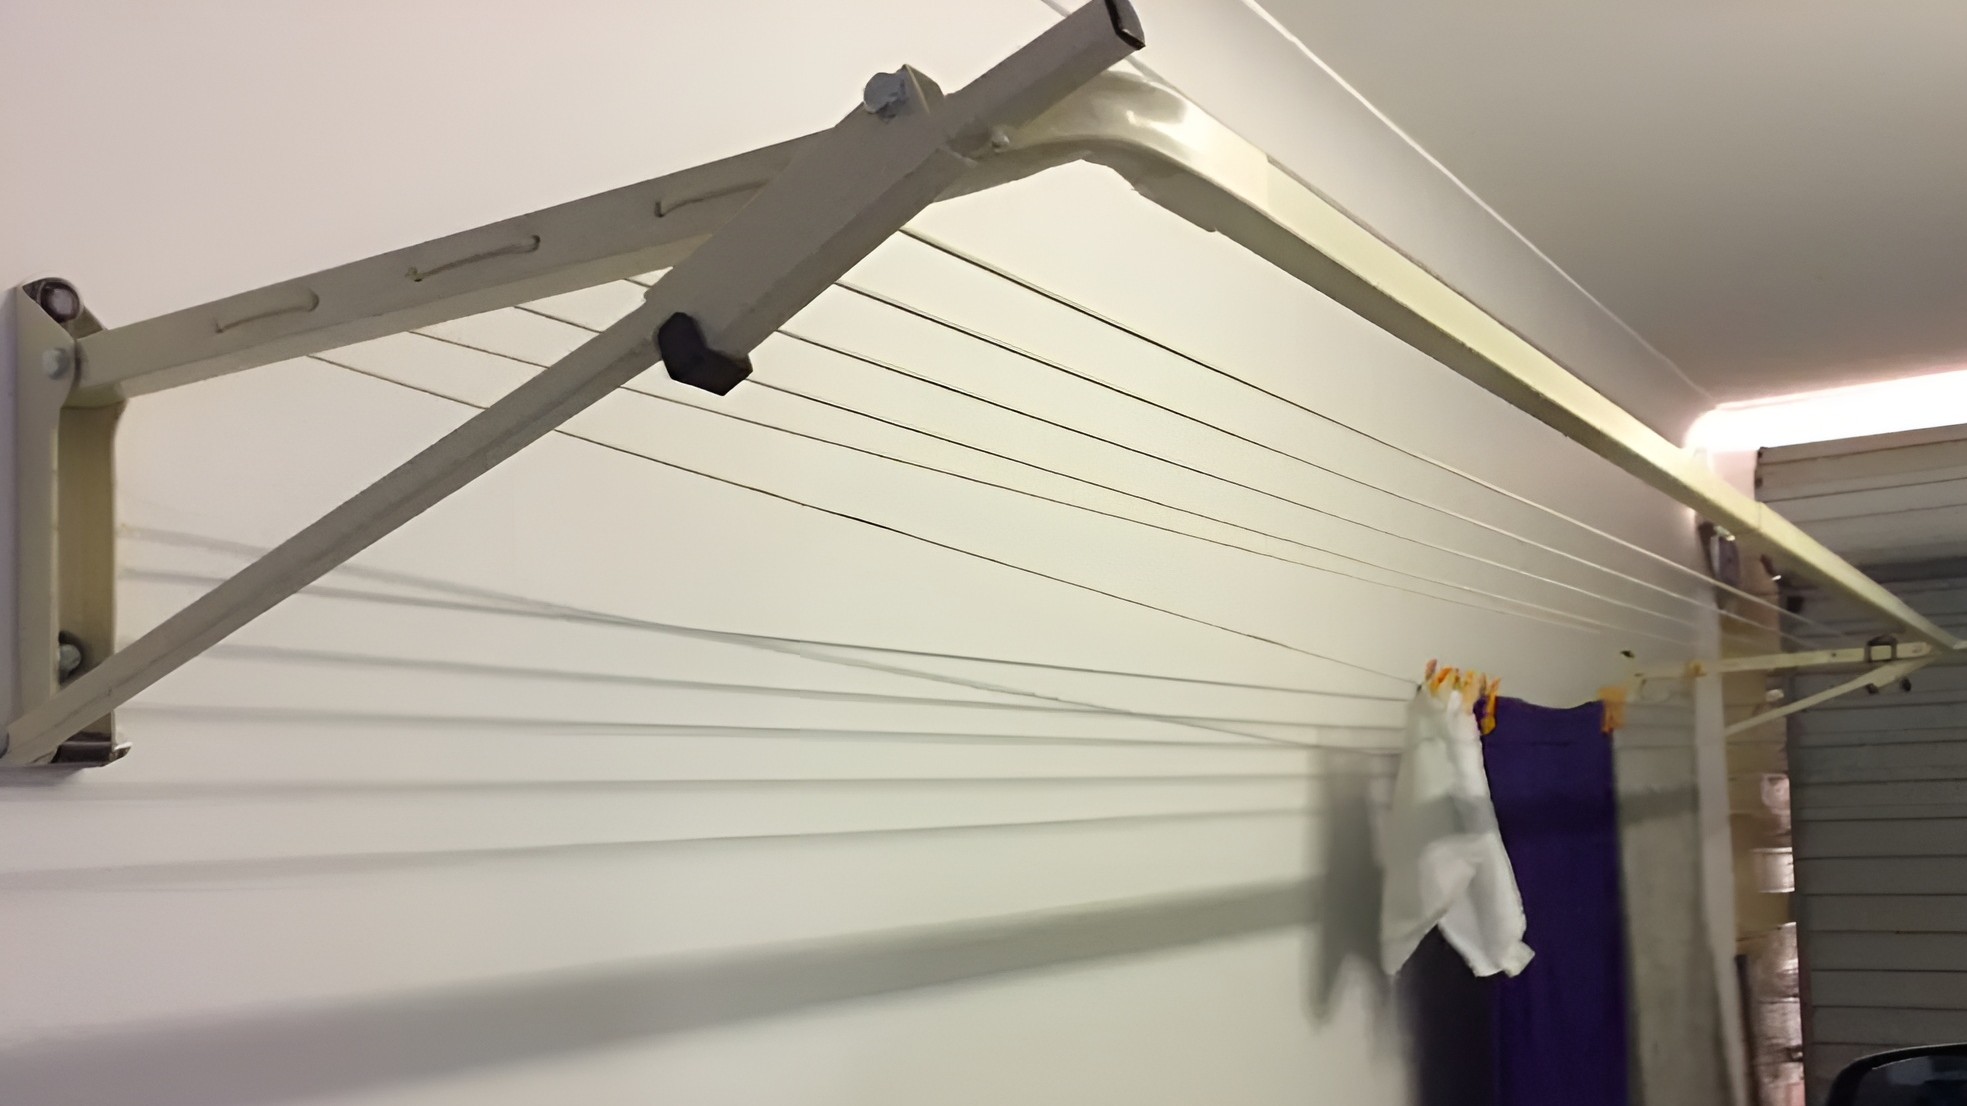 Fold Down Clothes Line for King Sheets Consider the Number of Lines and Line Space